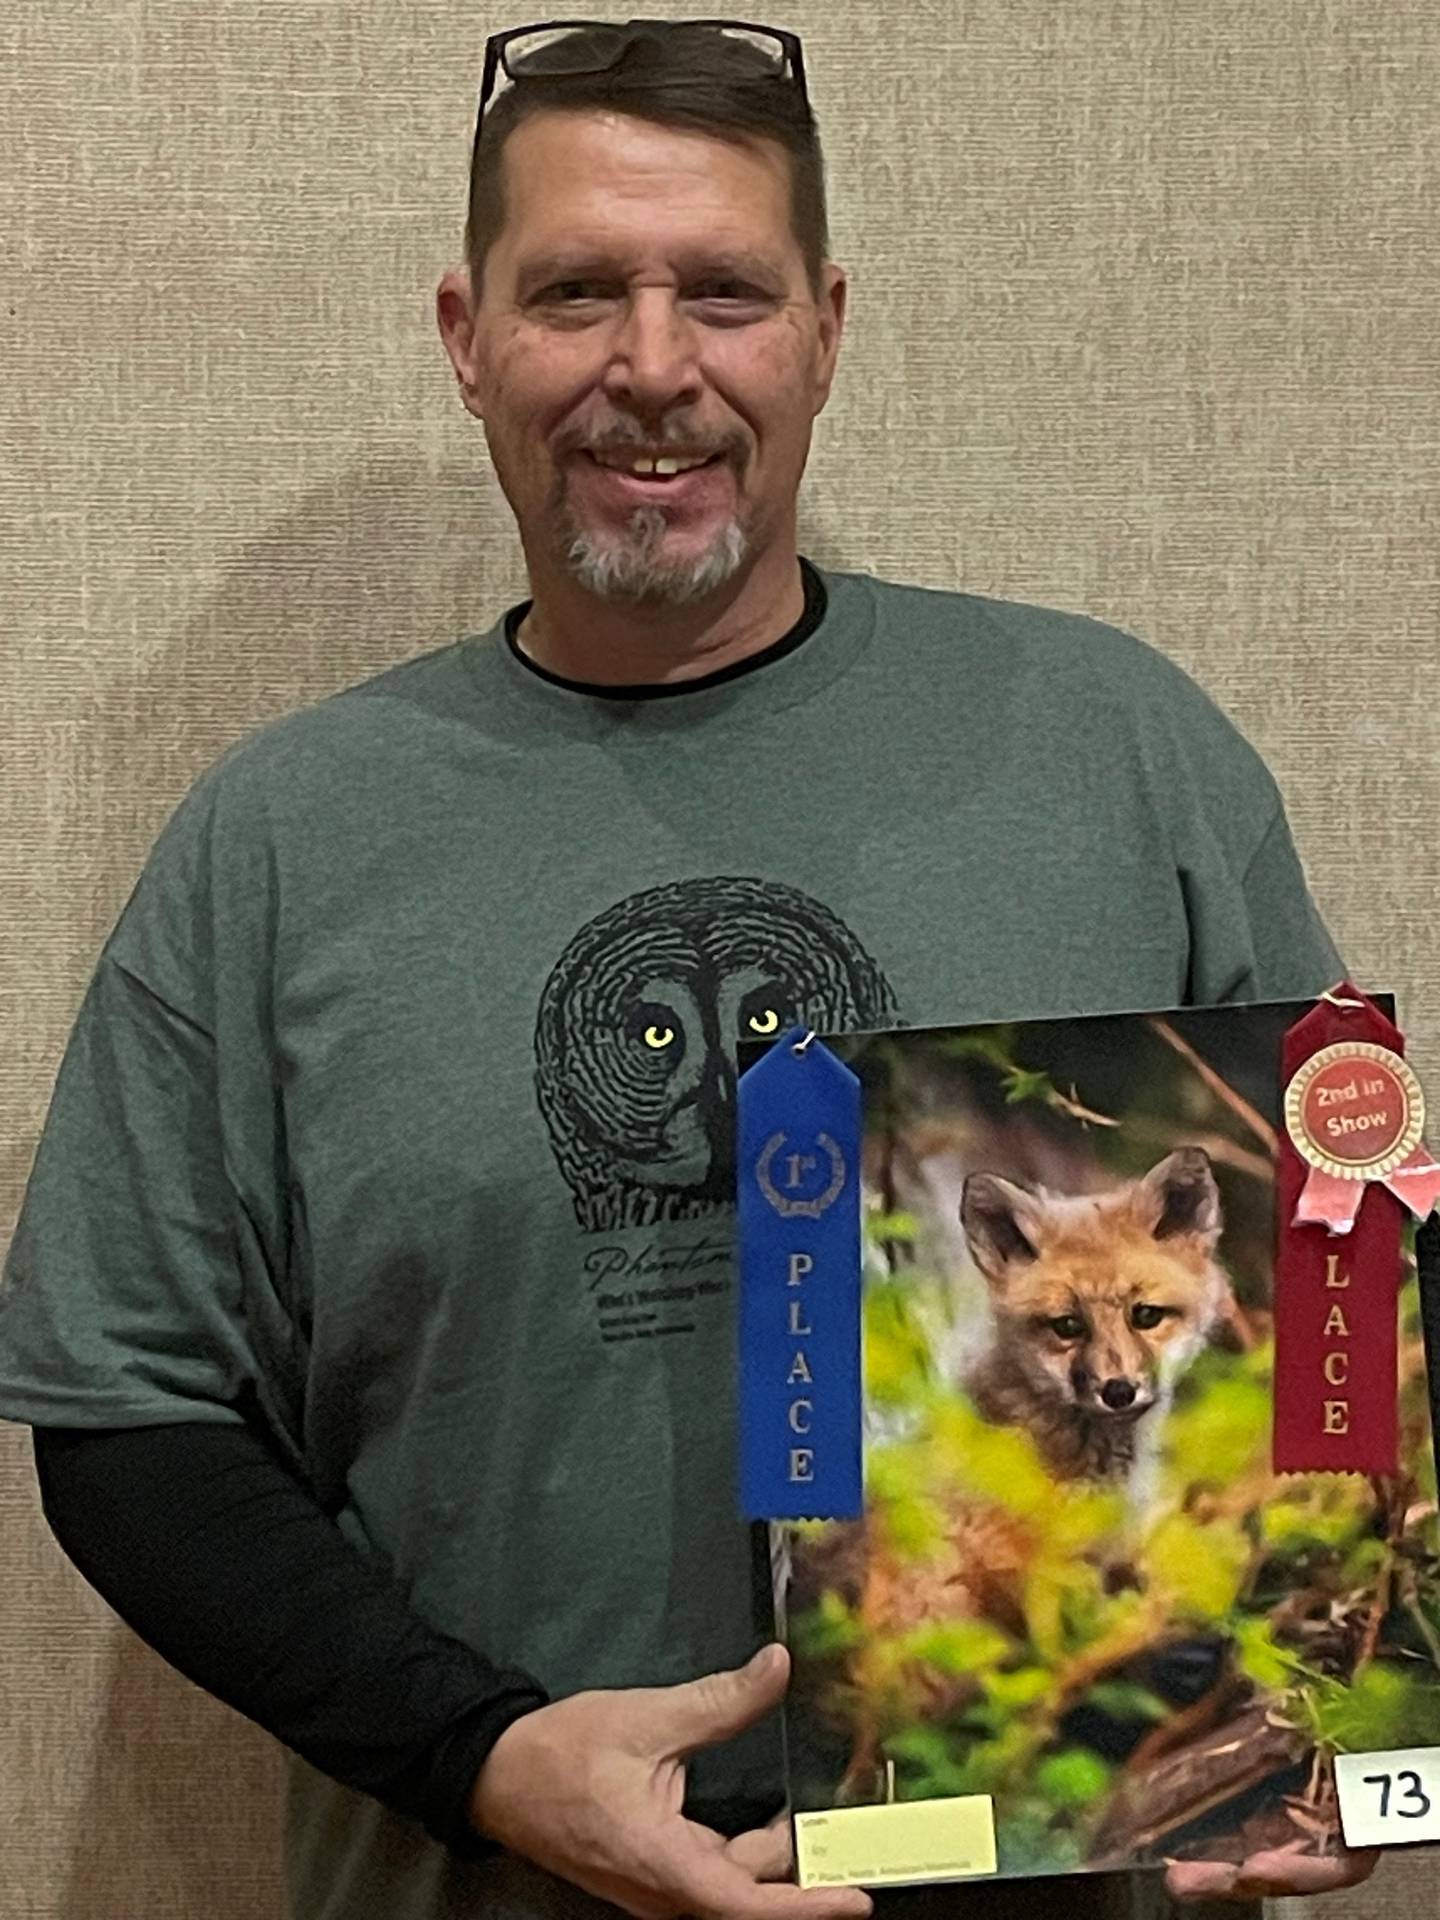 Phillip Smith was second place best in show at the Starved Rock Photography Show. He is displaying his photo “I Spy”
of a red fox kit.